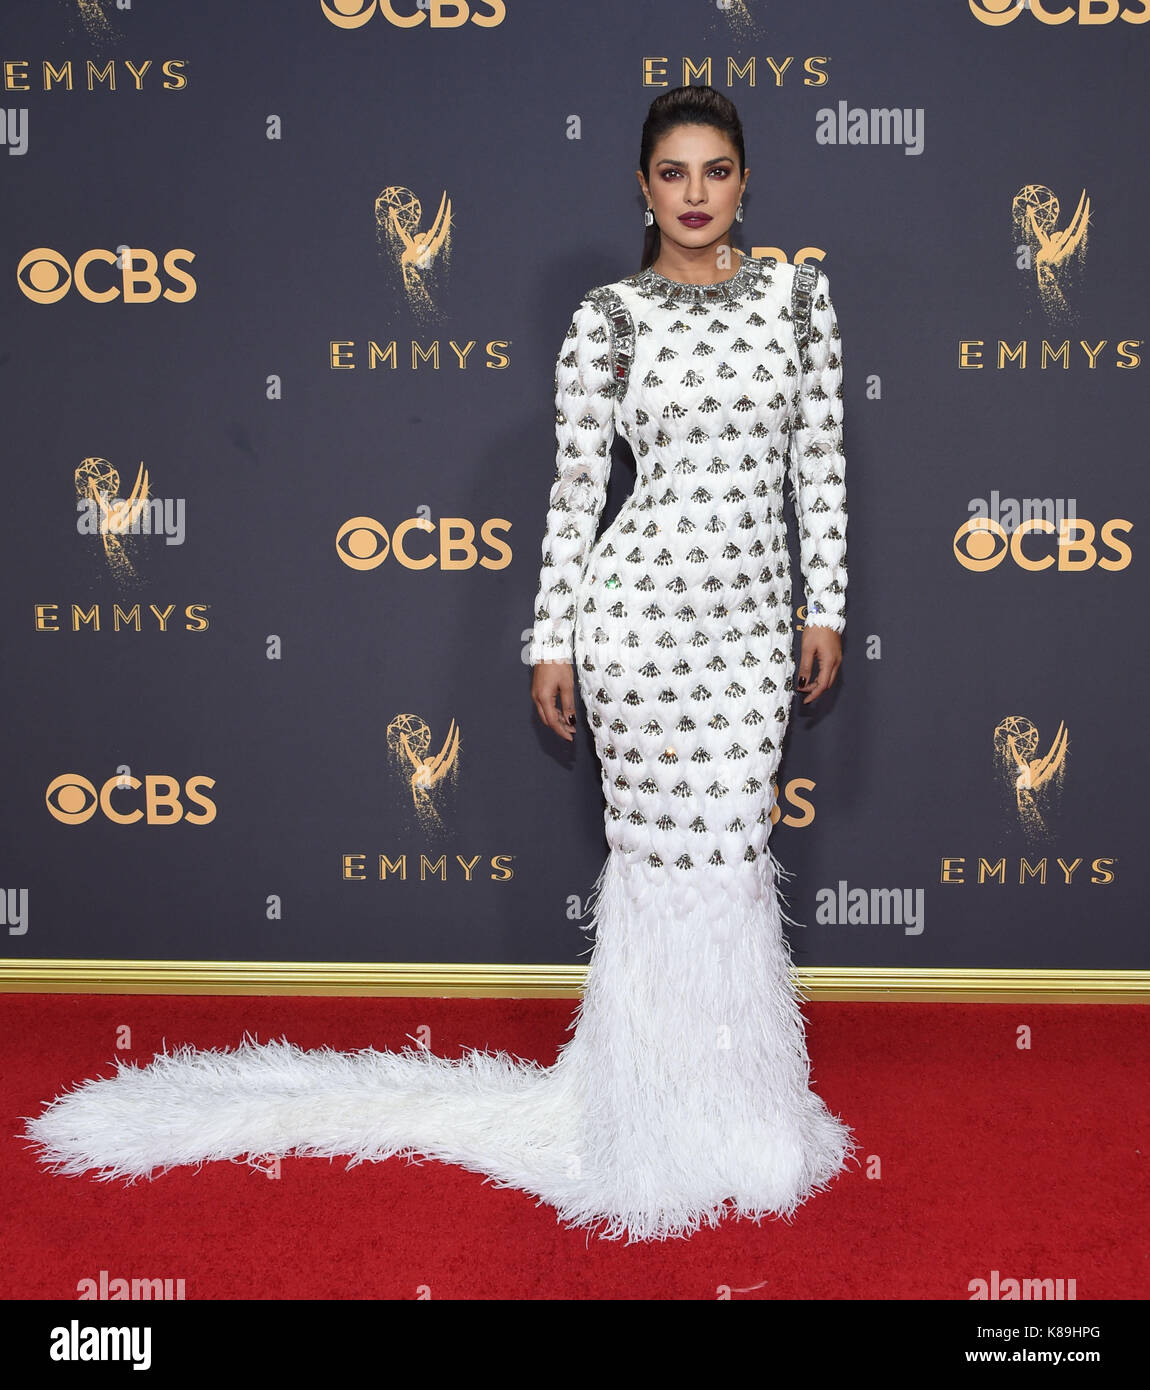 Los Angeles, USA. 17th Sep, 2017. Priyanka Chopra 263 arriving at the 69th annual Emmy awards at the Microsoft theatre. in Los Angeles. September 17, 2017 Credit: Tsuni/USA/Alamy Live News Stock Photo